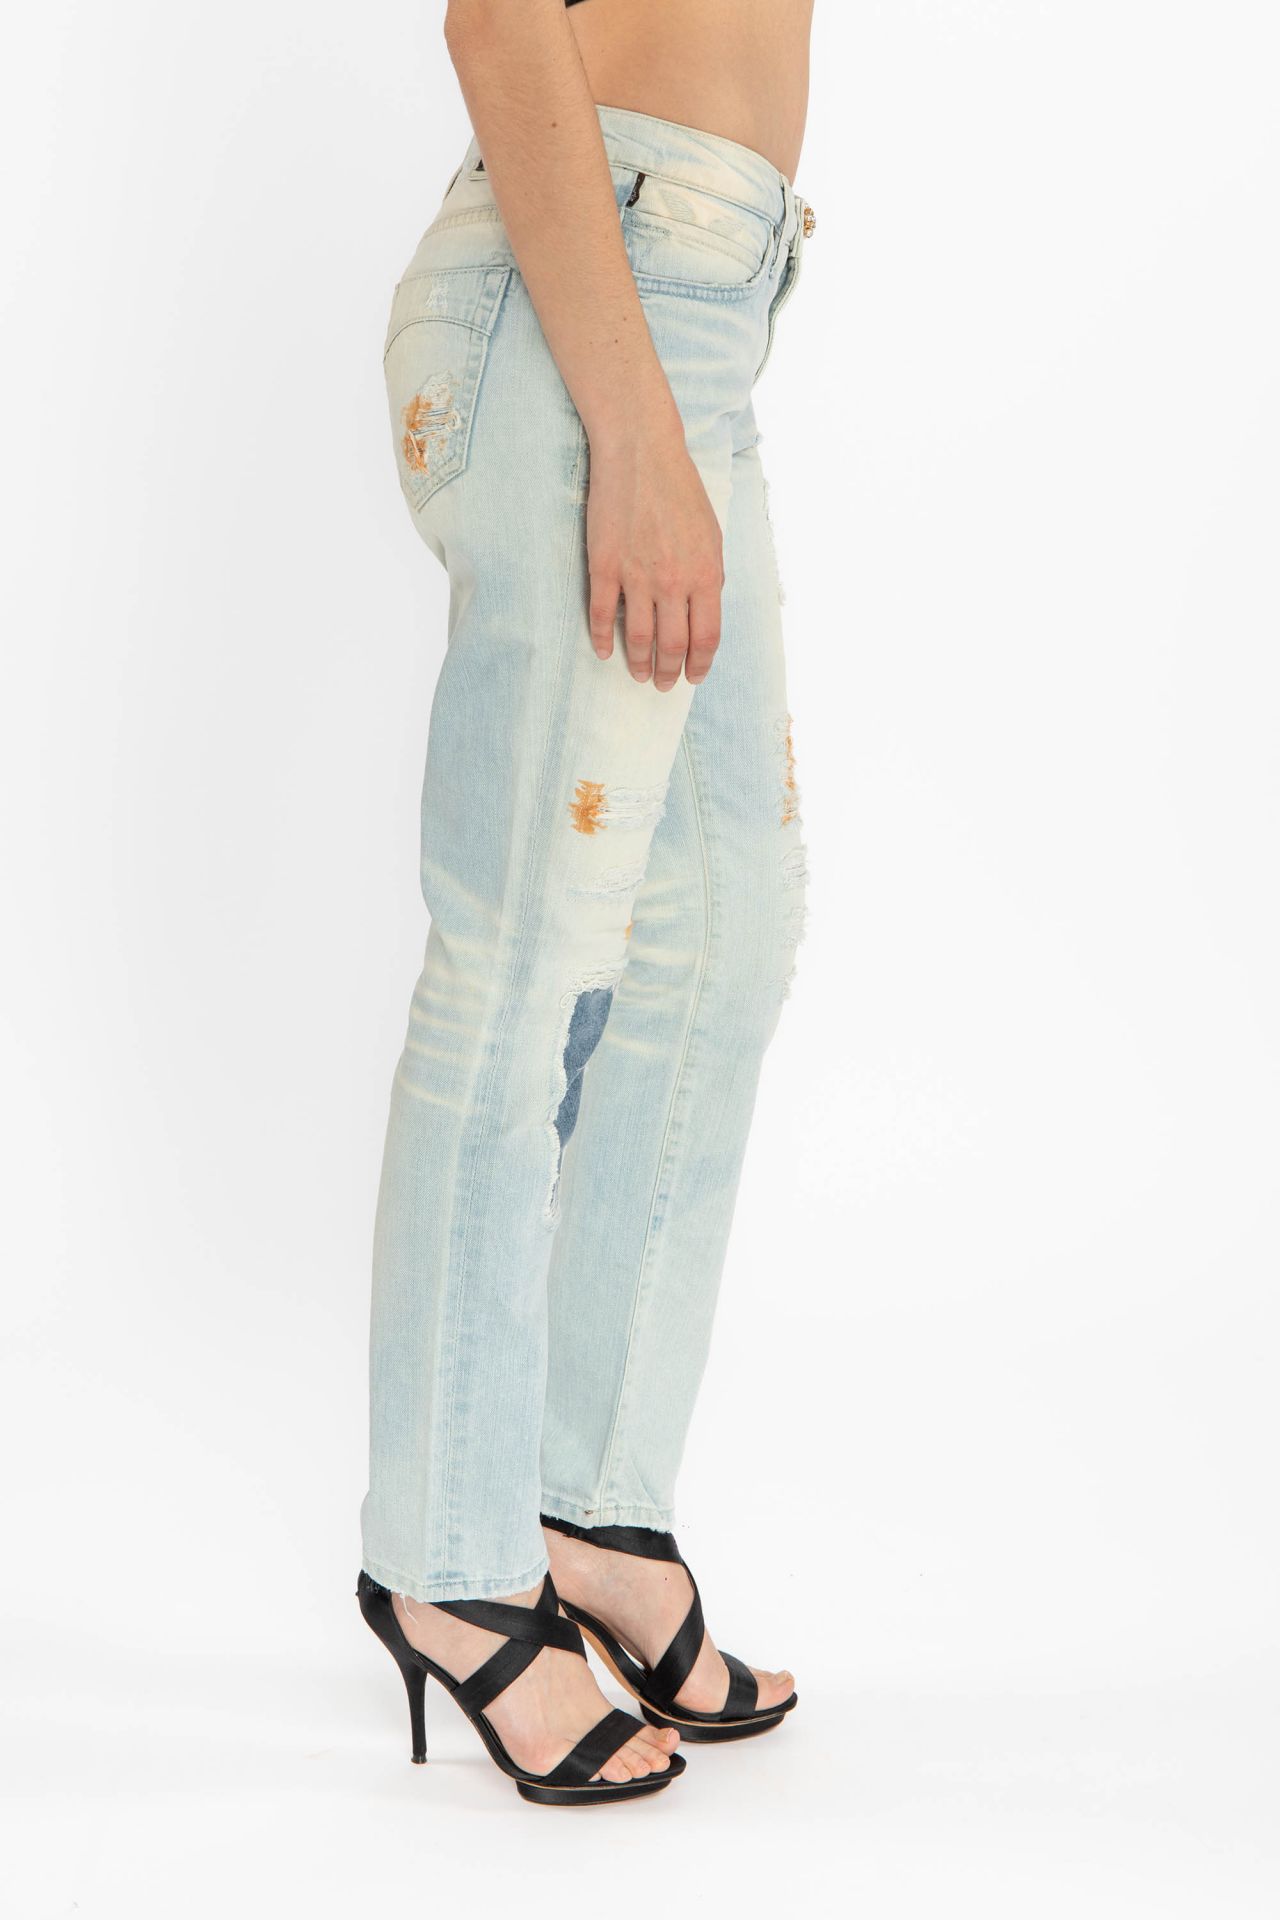 BOYFRIEND STYLE WOMENS PATCHED JEANS IN GEORGE WASH